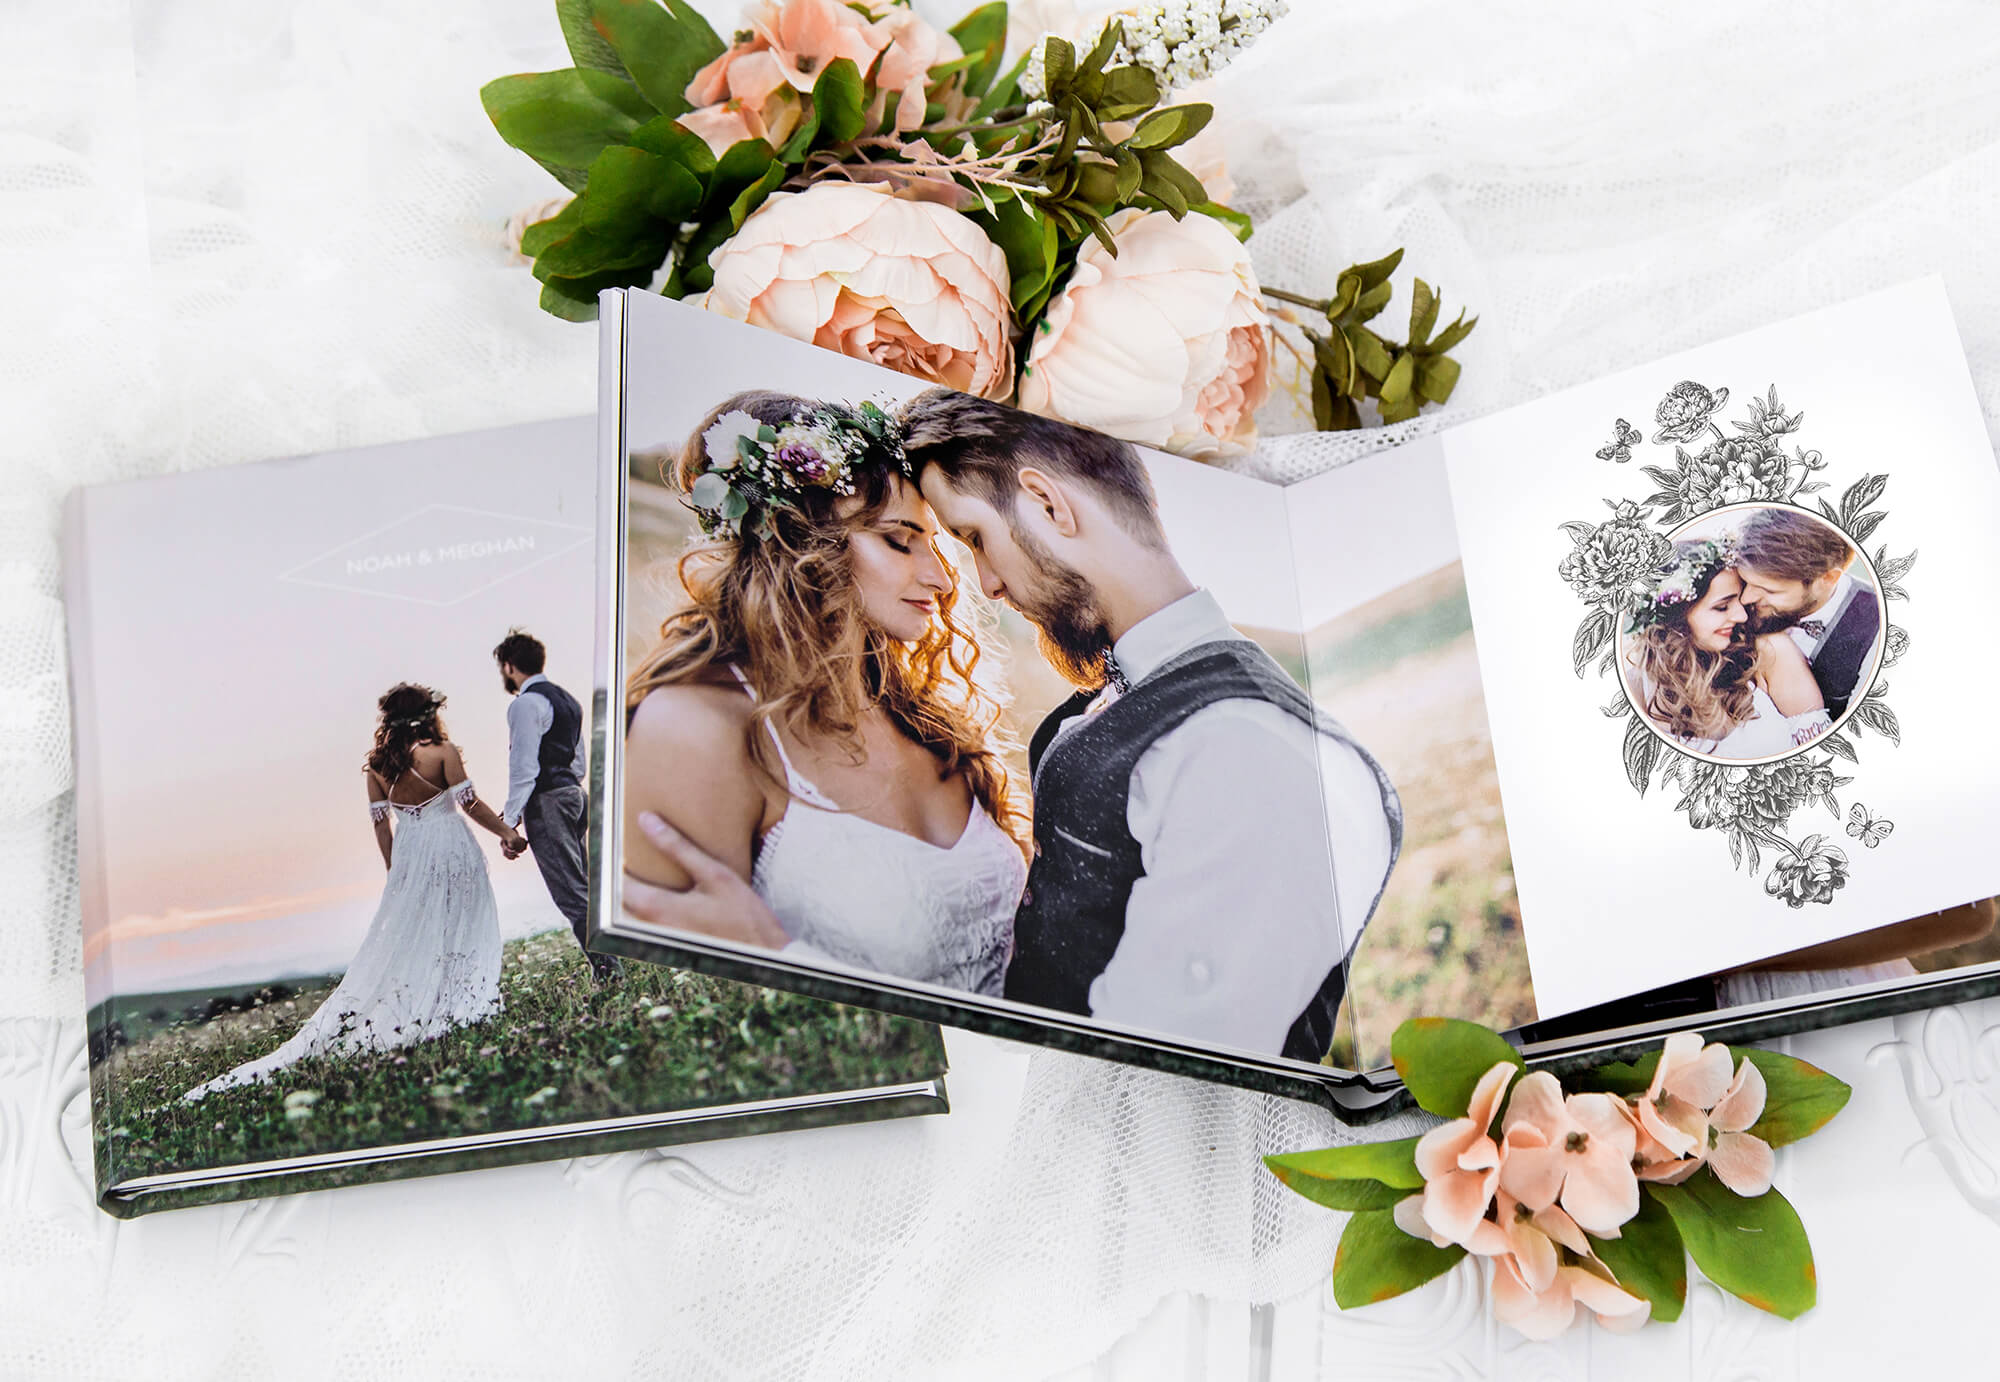 3 Wedding Album Best-Sellers For Every Style